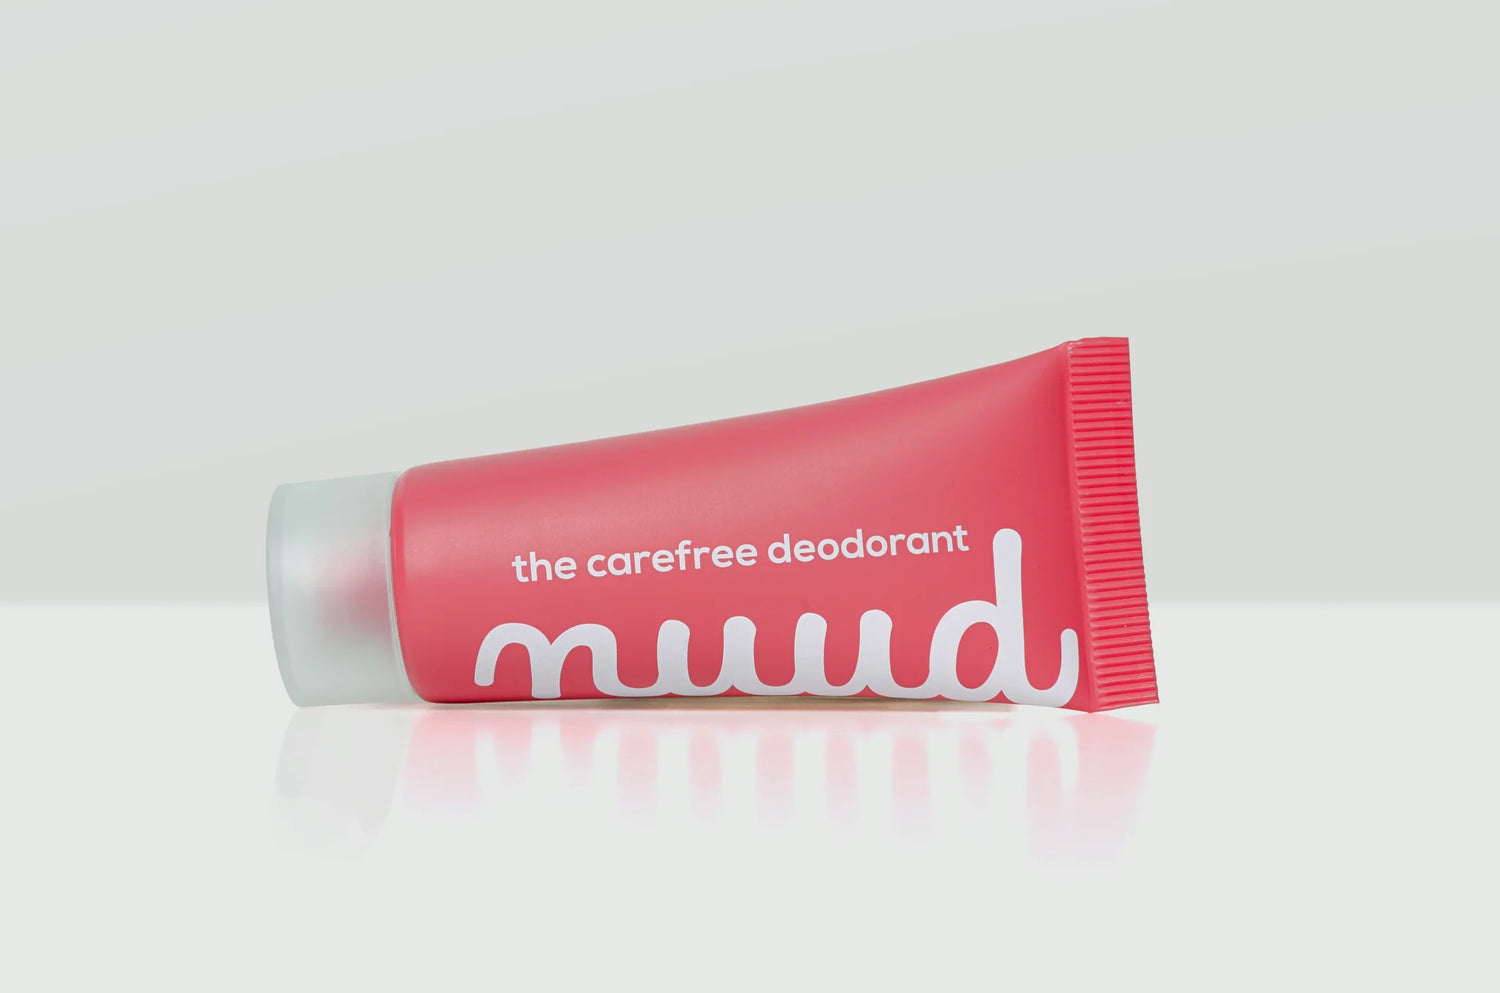 Hello, we’re nuud. A vegan anti-odorant that is magically effective for 3-7 days.